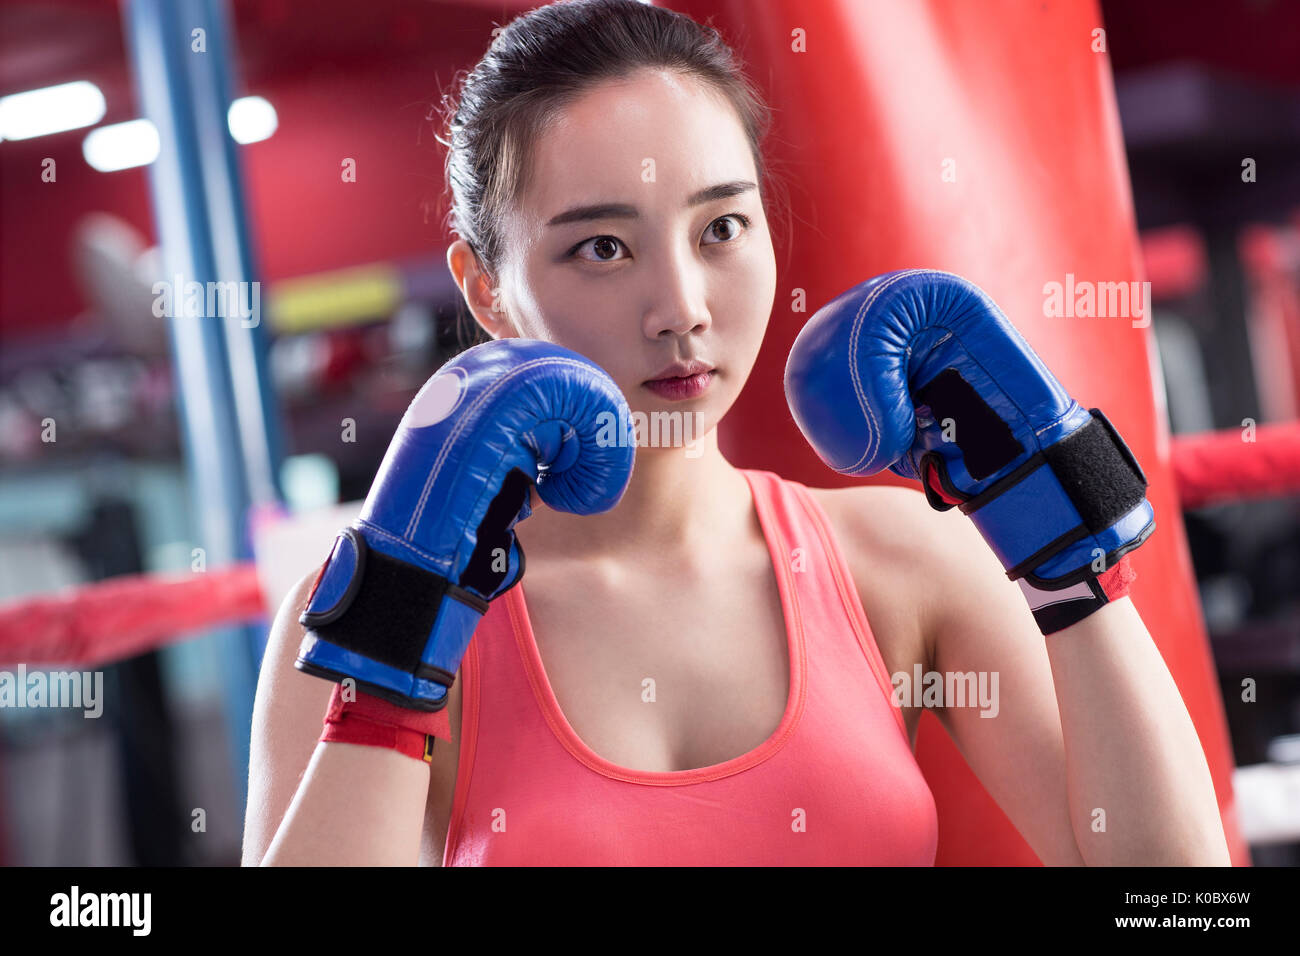 Portrait of young female boxer with gloves posing Stock Photo